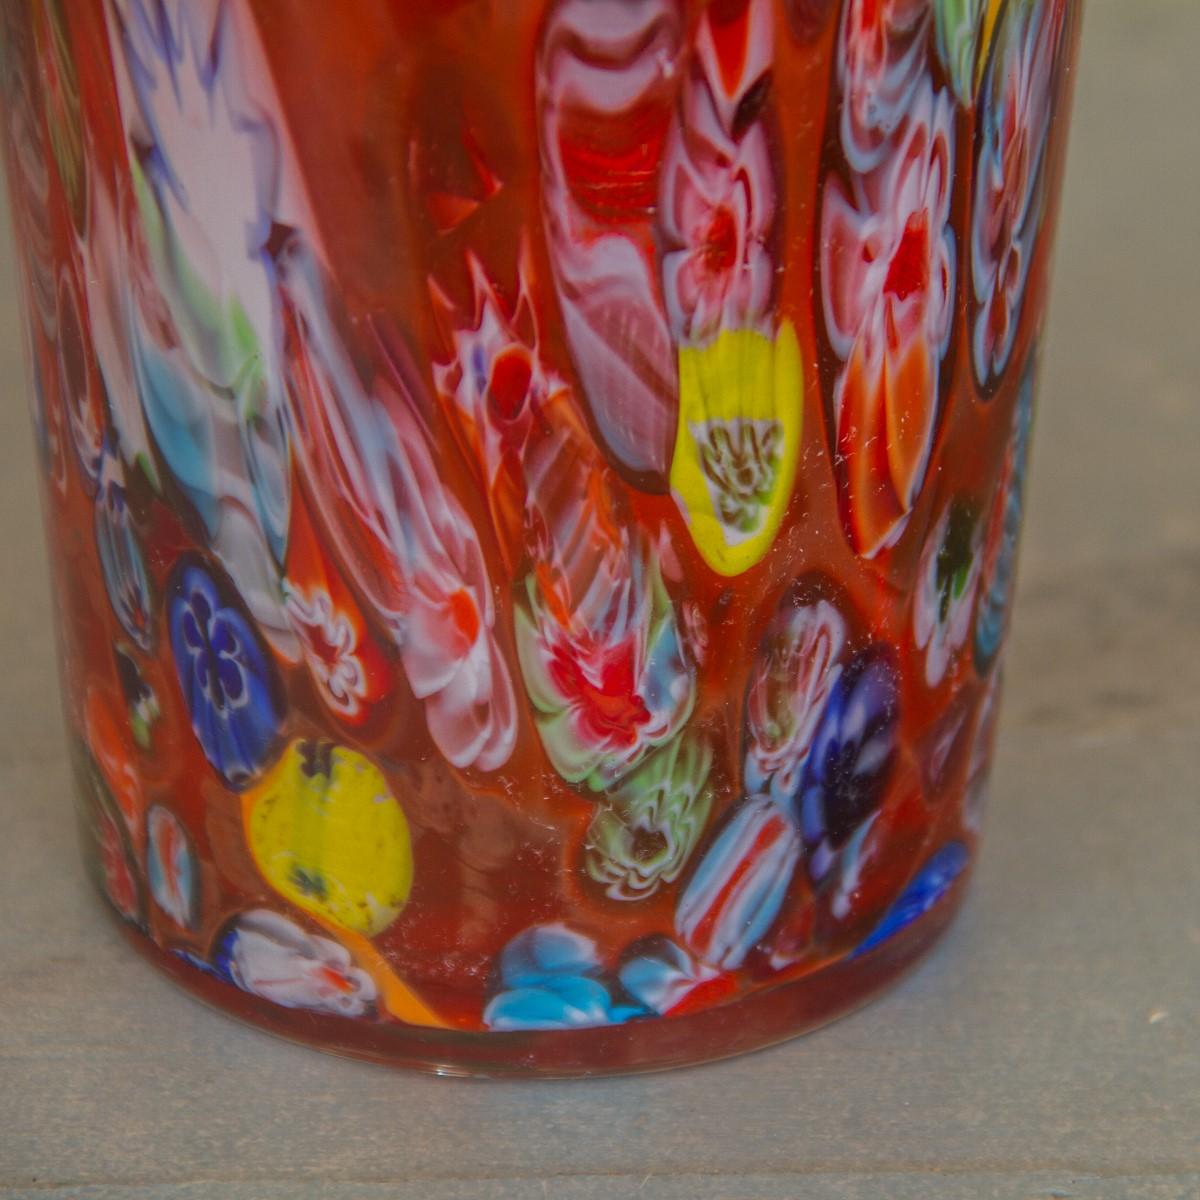 A large red and multicolored Millefiori glass vase. The term Millefiori is a combination of the Italian words 